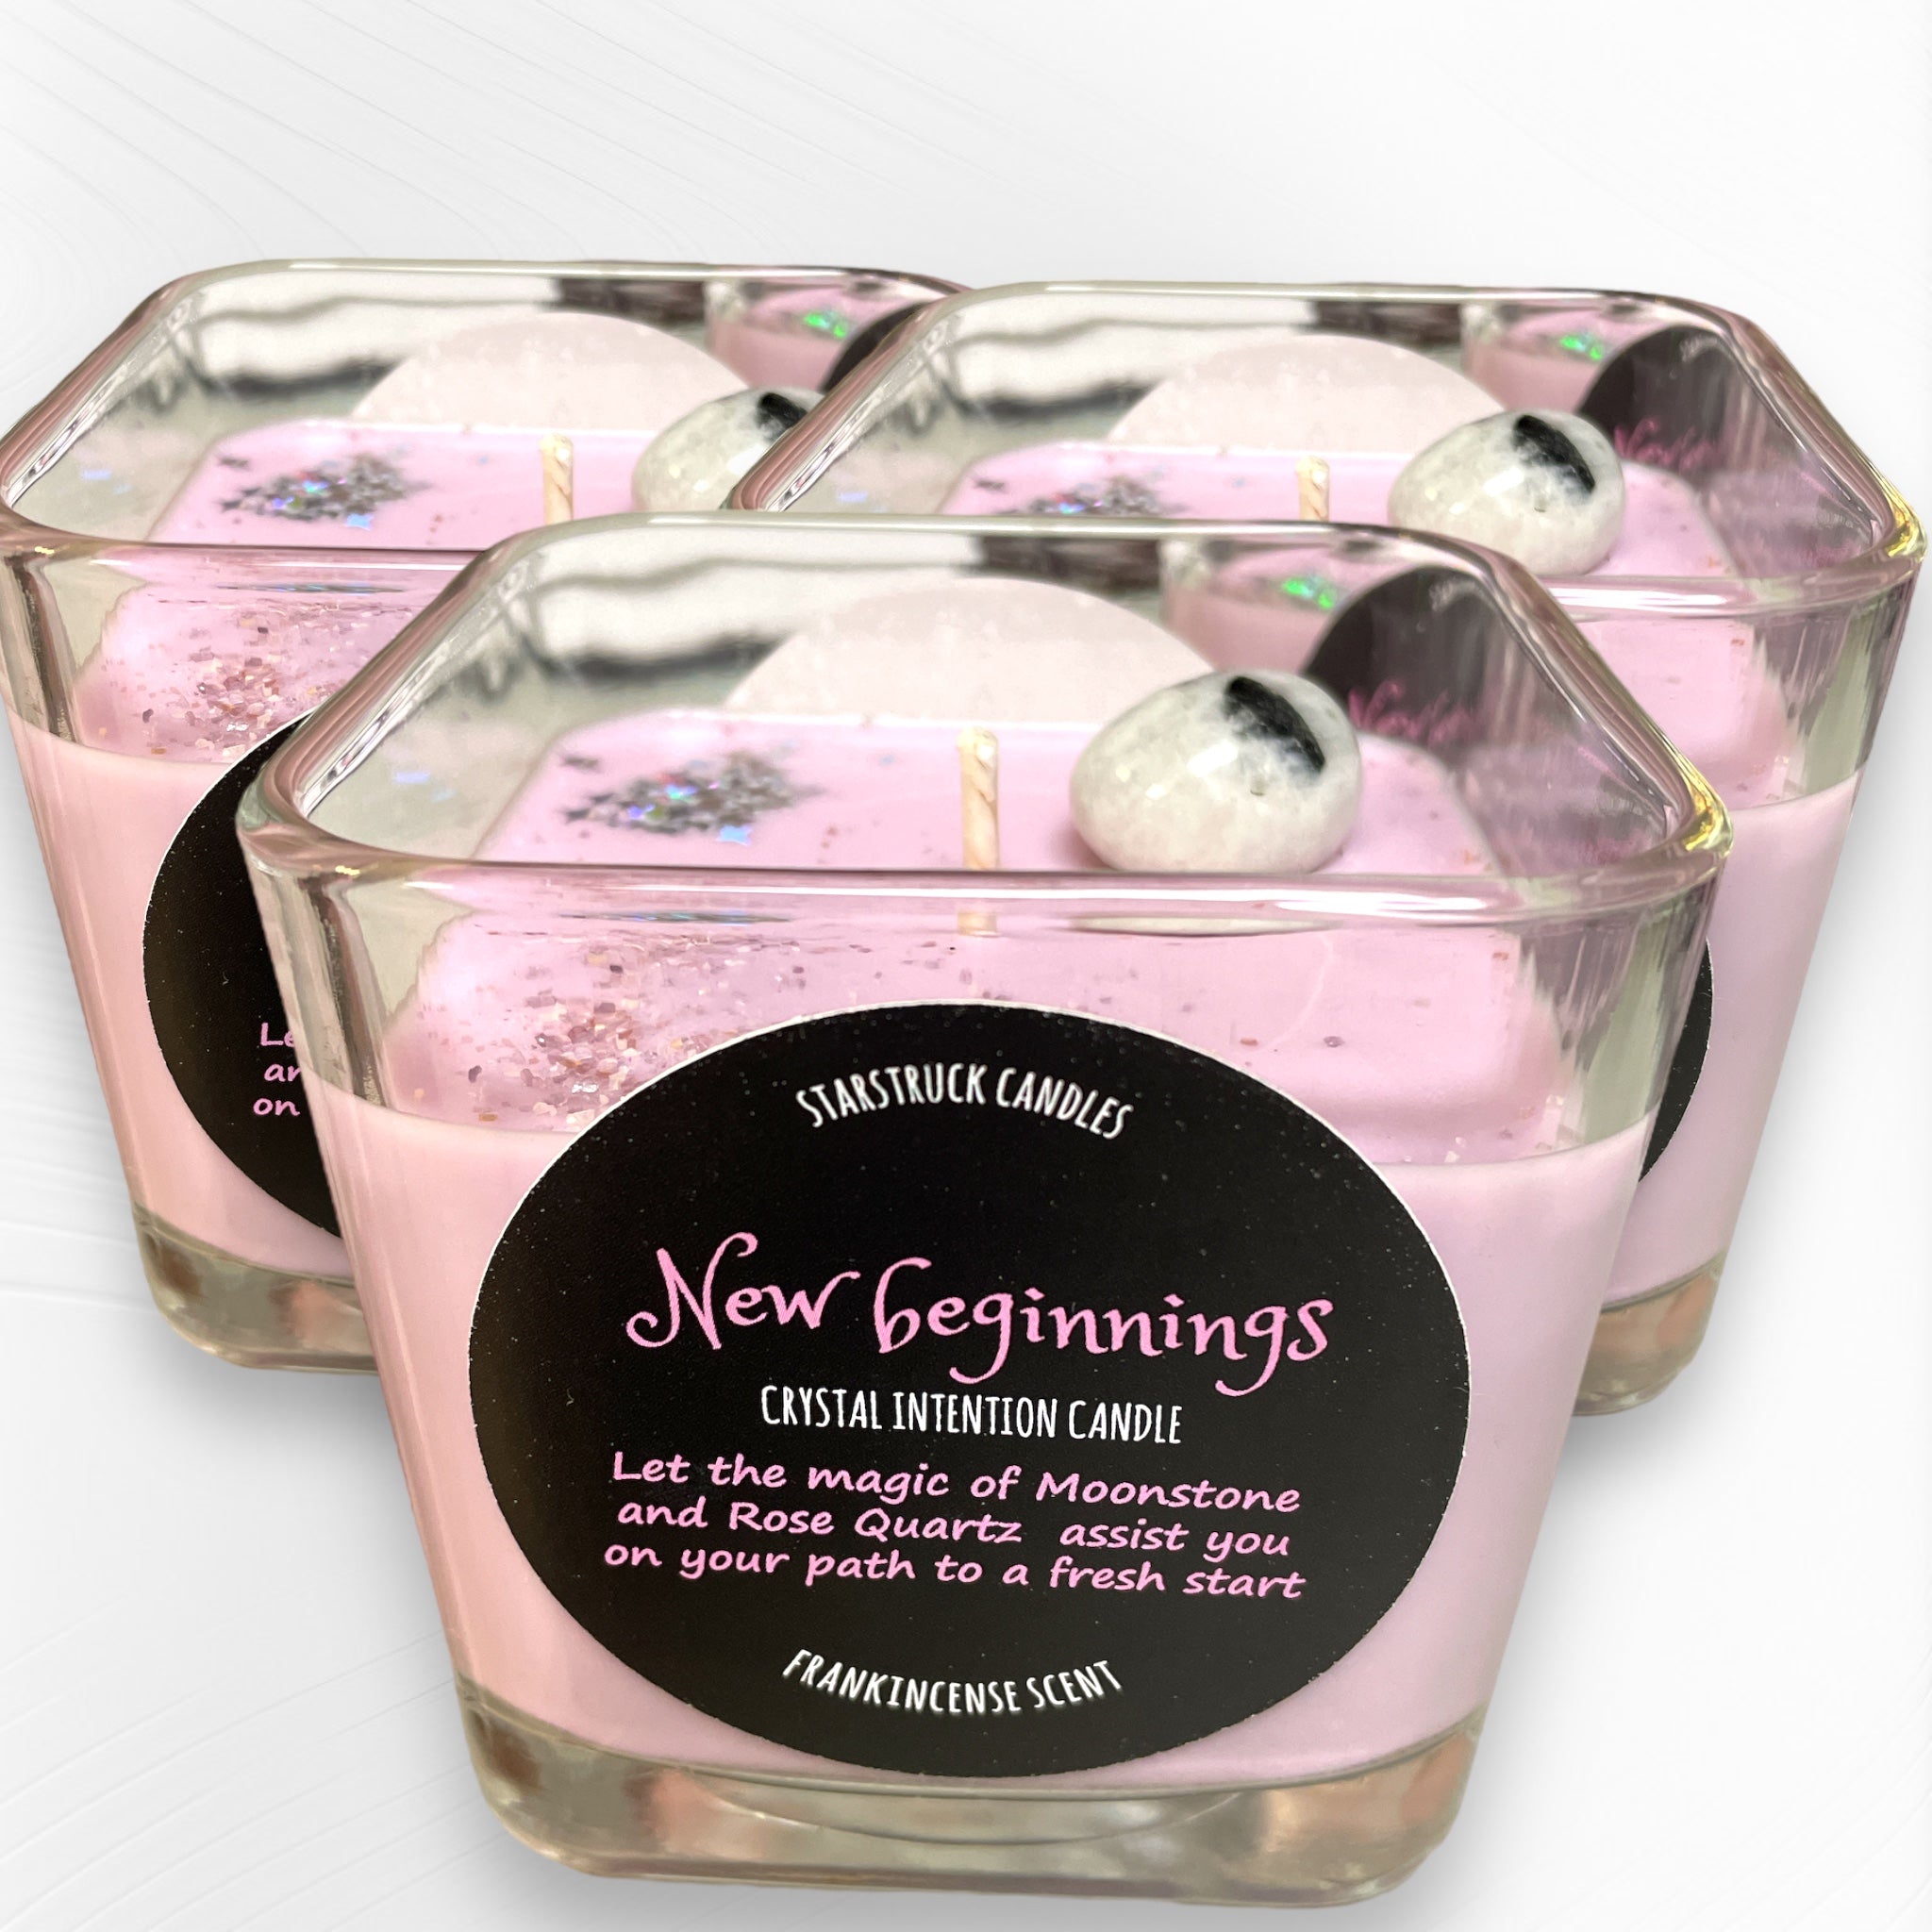 New Beginnings Crystal intention candle